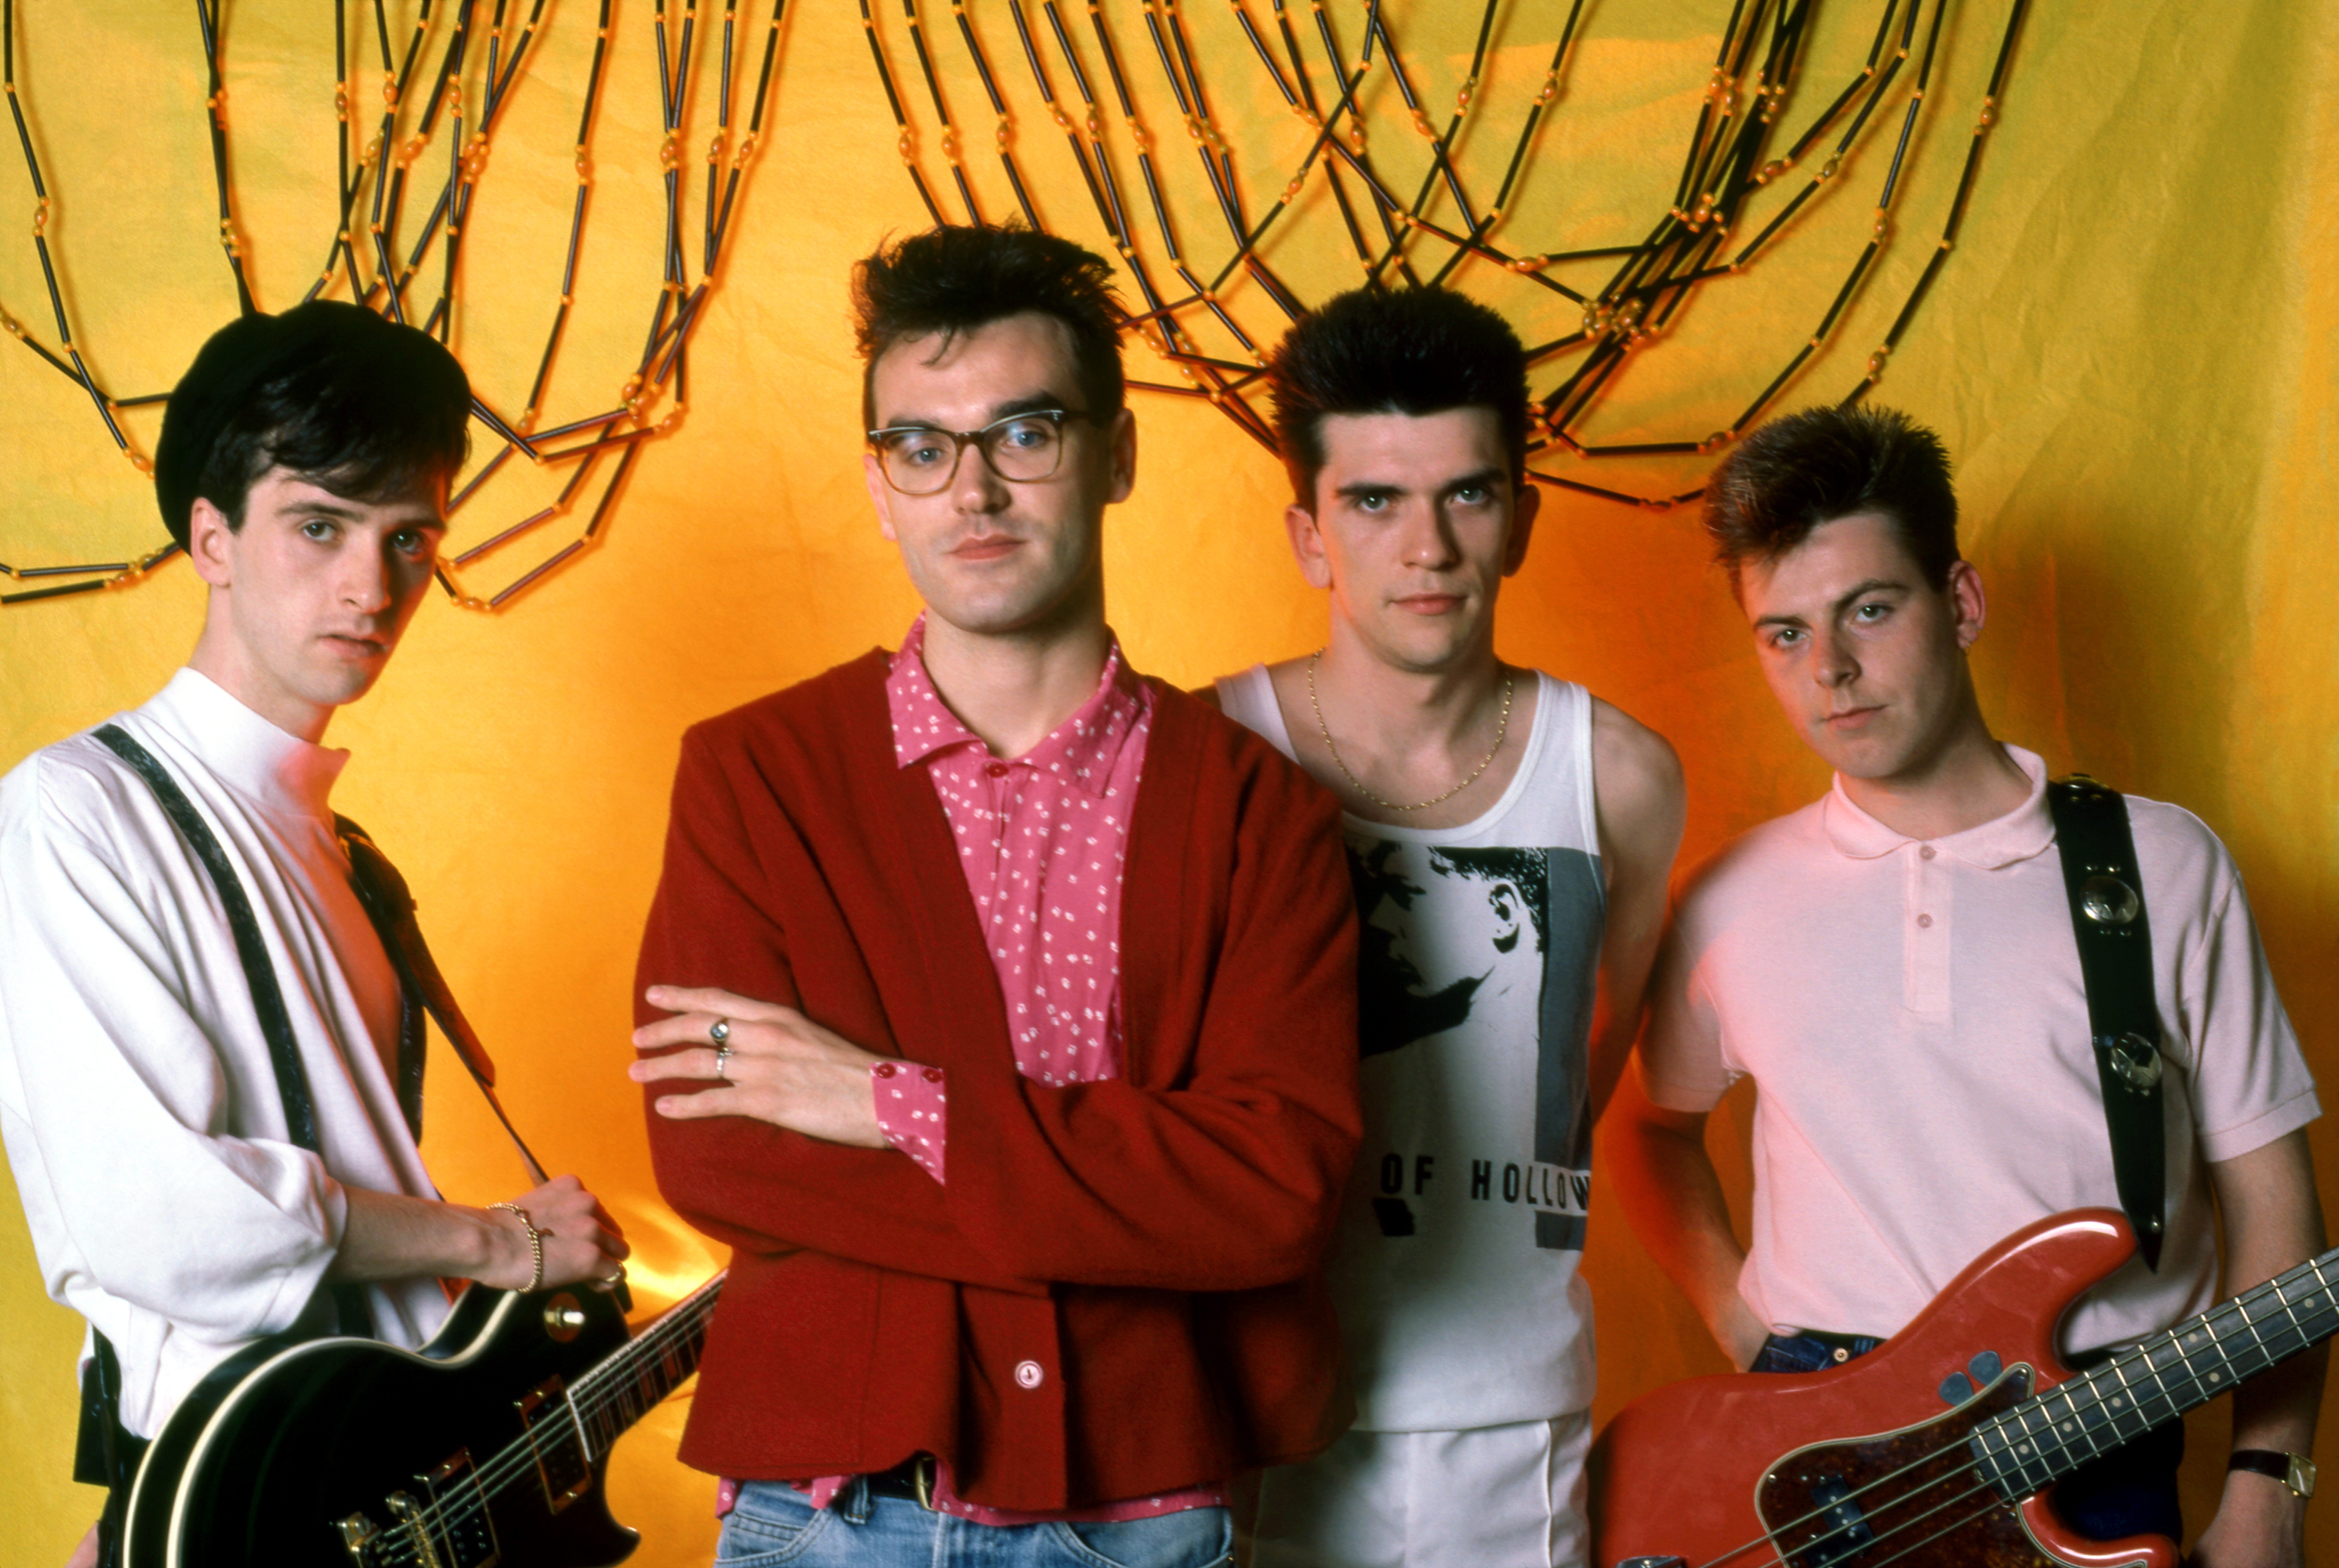 Marr, Morrissey, Mike Joyce and Andy Rourke pose for a portrait during the 1985 Meat Is Murder Tour